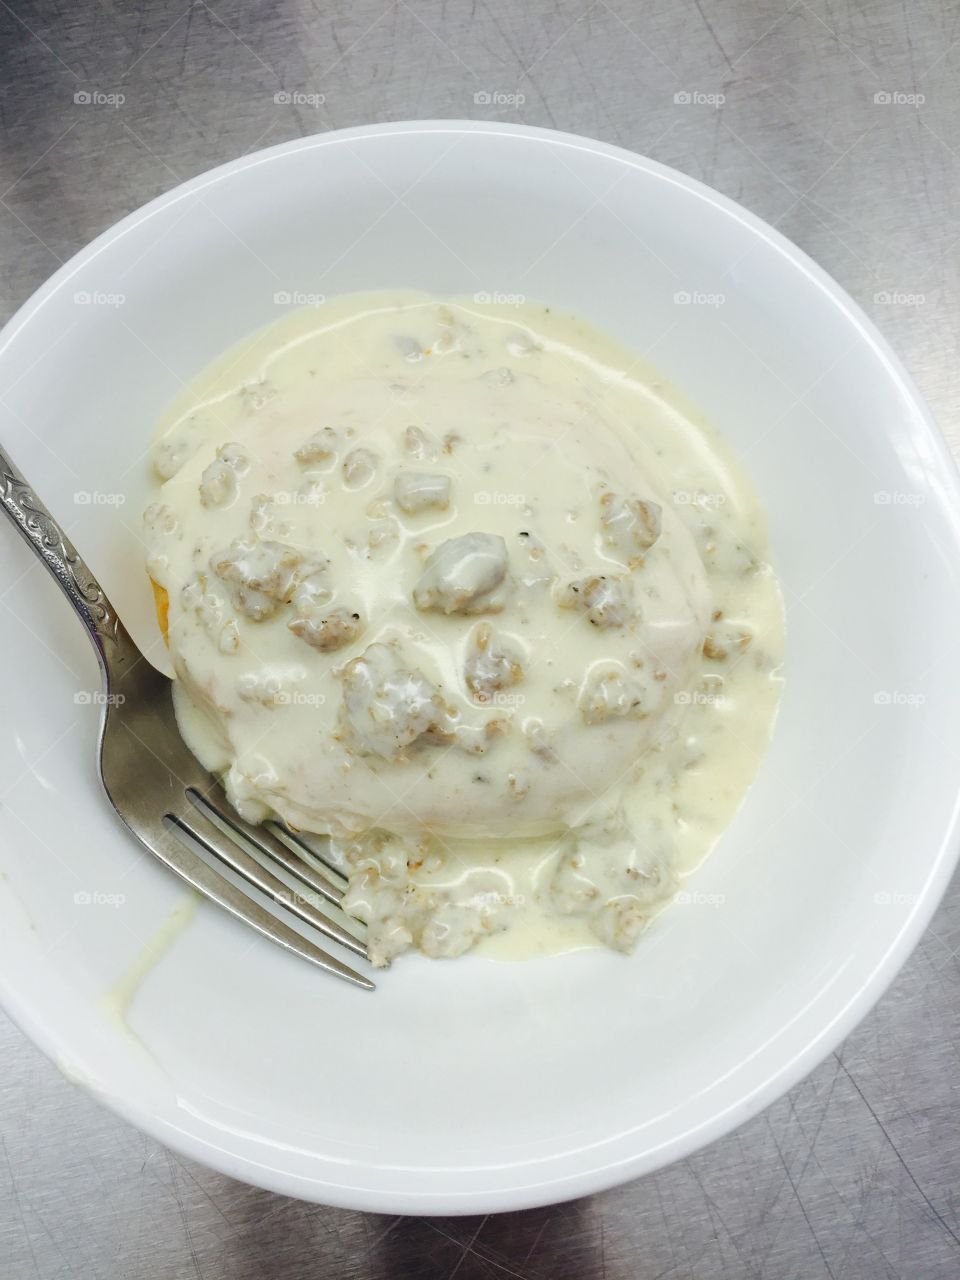 Yummy biscuits and gravy!